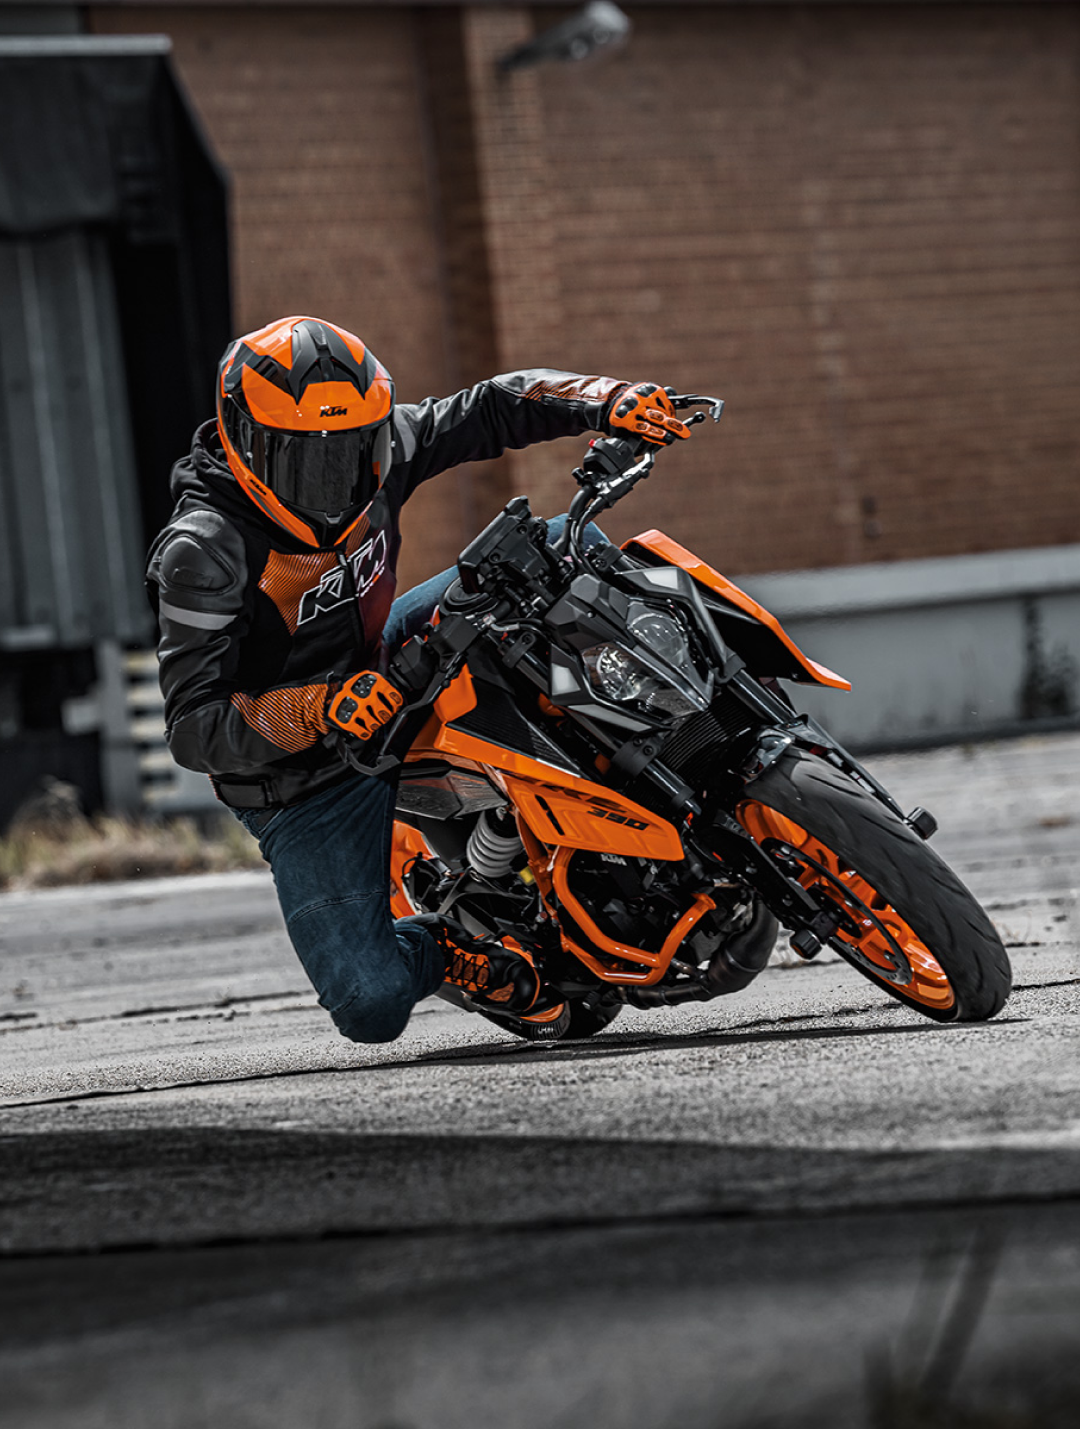 KTM 390 Duke - Price, Colors, Images, Specifications